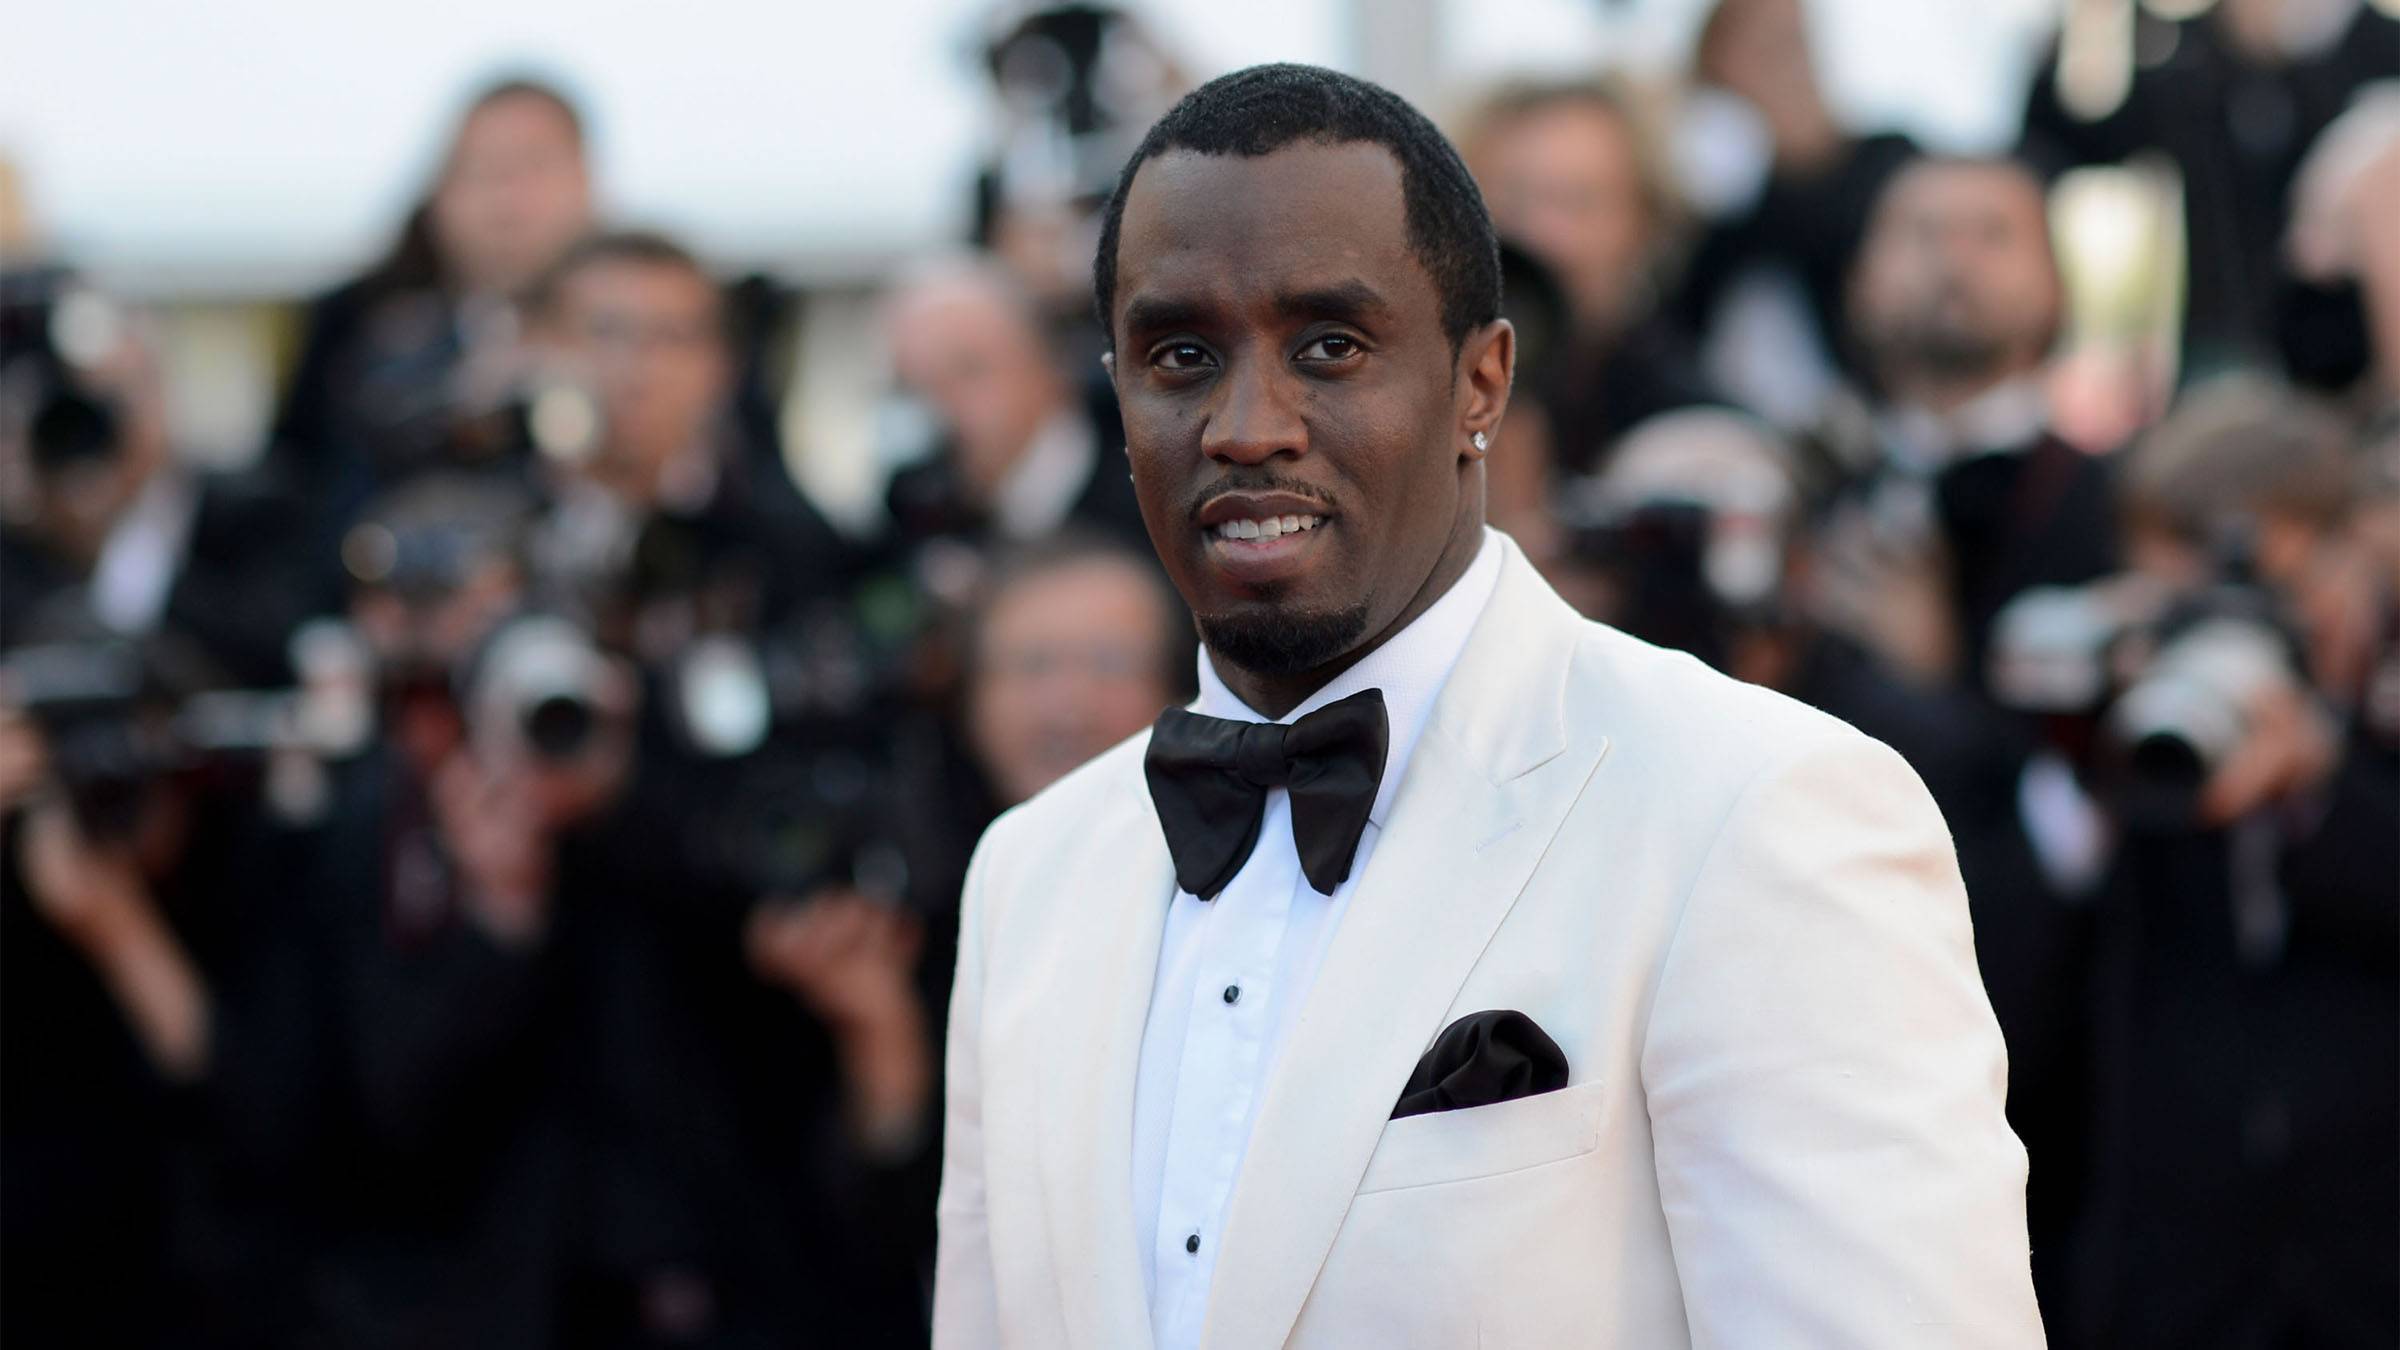 Diddy announces first new album in 17 years